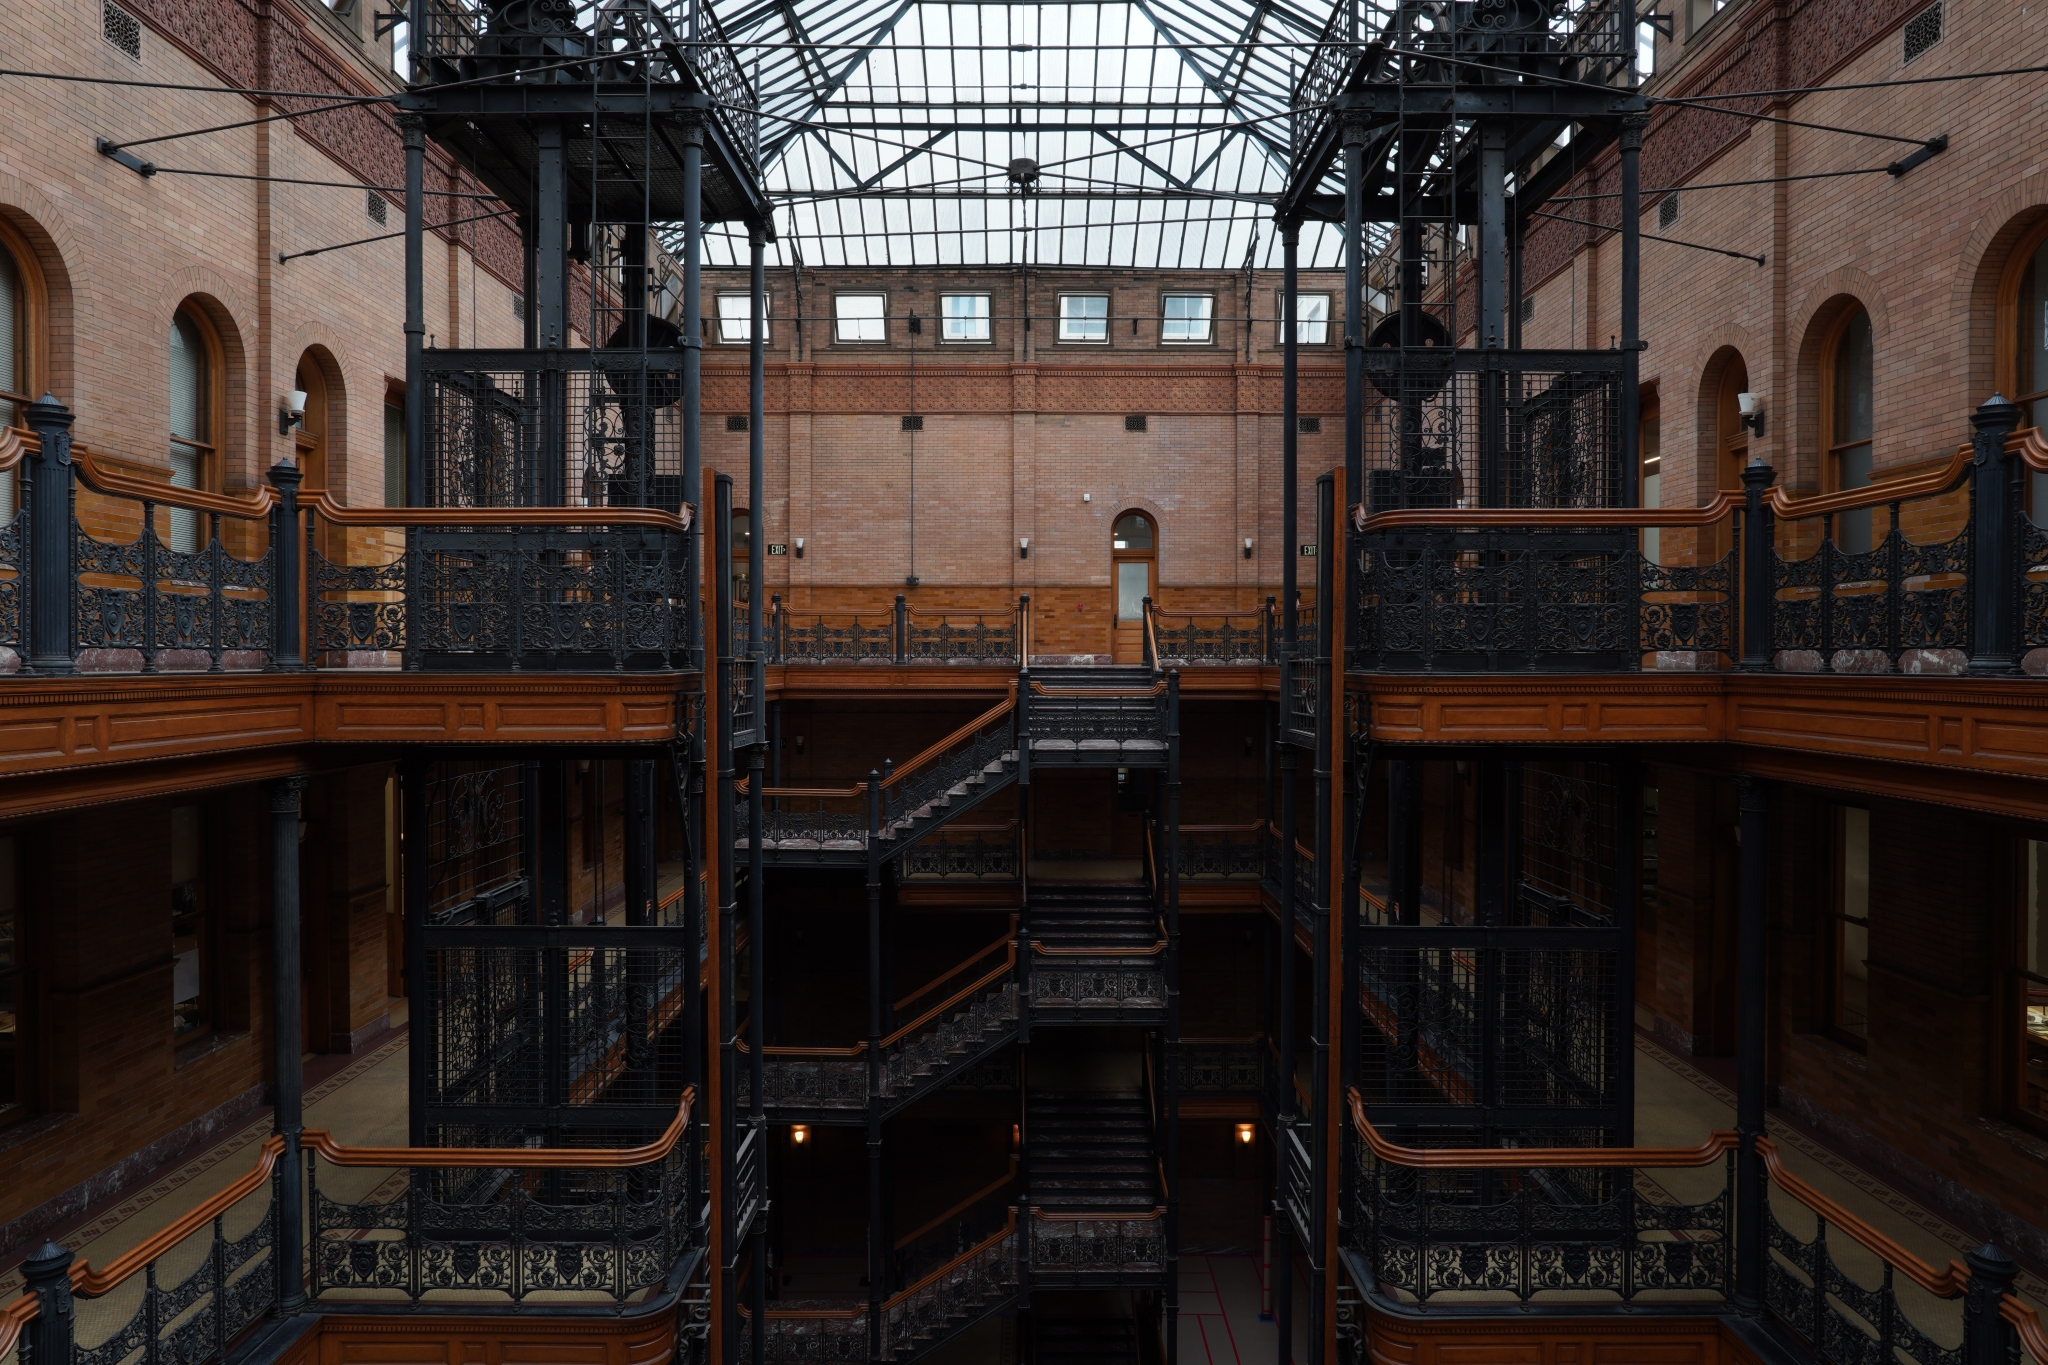 Central atrium of a multi-storey brick building with each floor connected by black metal staircases